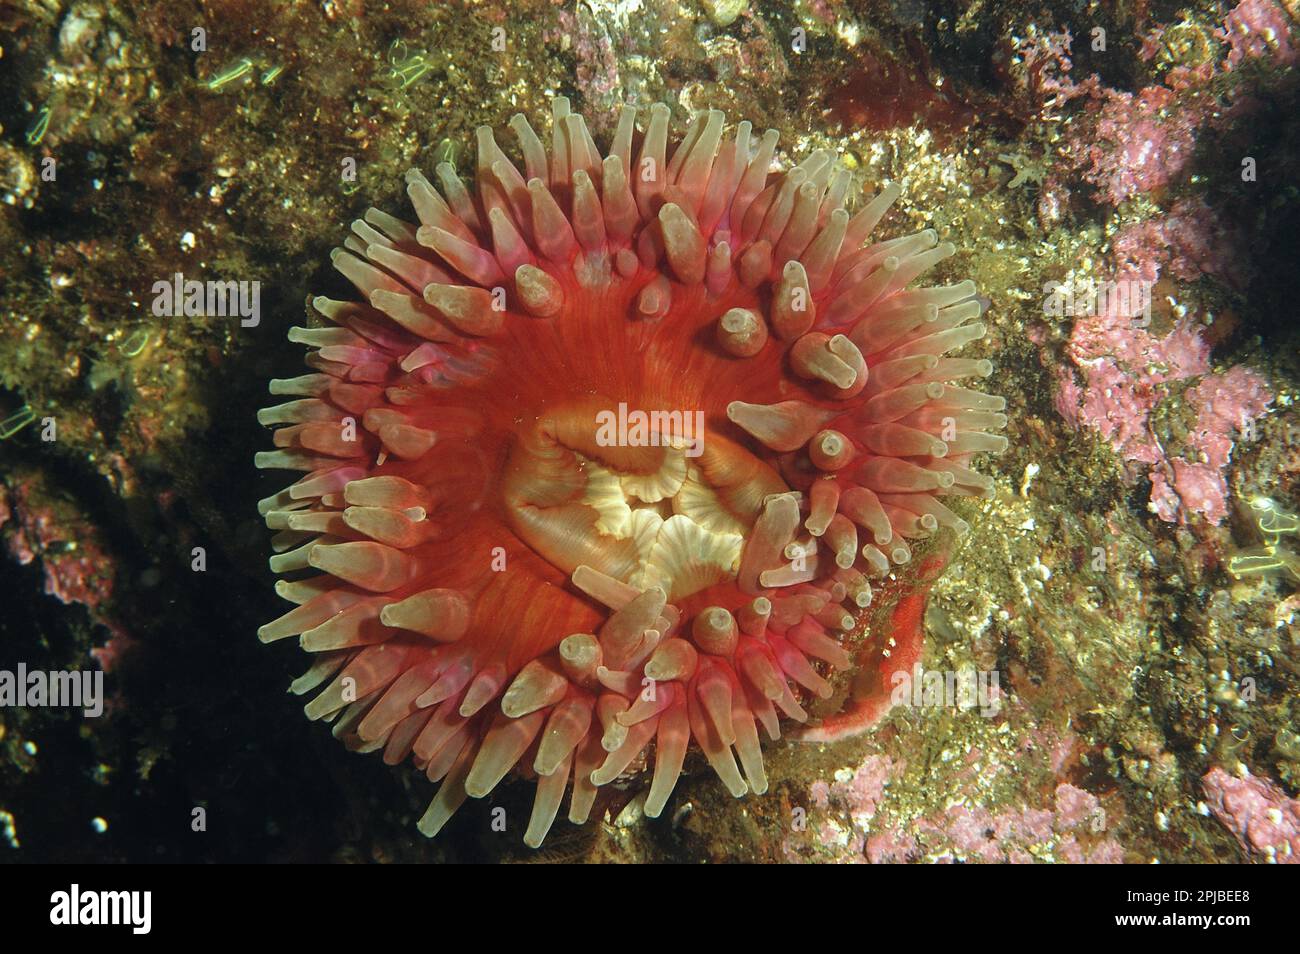 Horse anemone (Urticina eques), adult, with tentacles outstretched, on a rock face in a sea loch, Loch Carron, Ross and Cromarty, Highlands Stock Photo